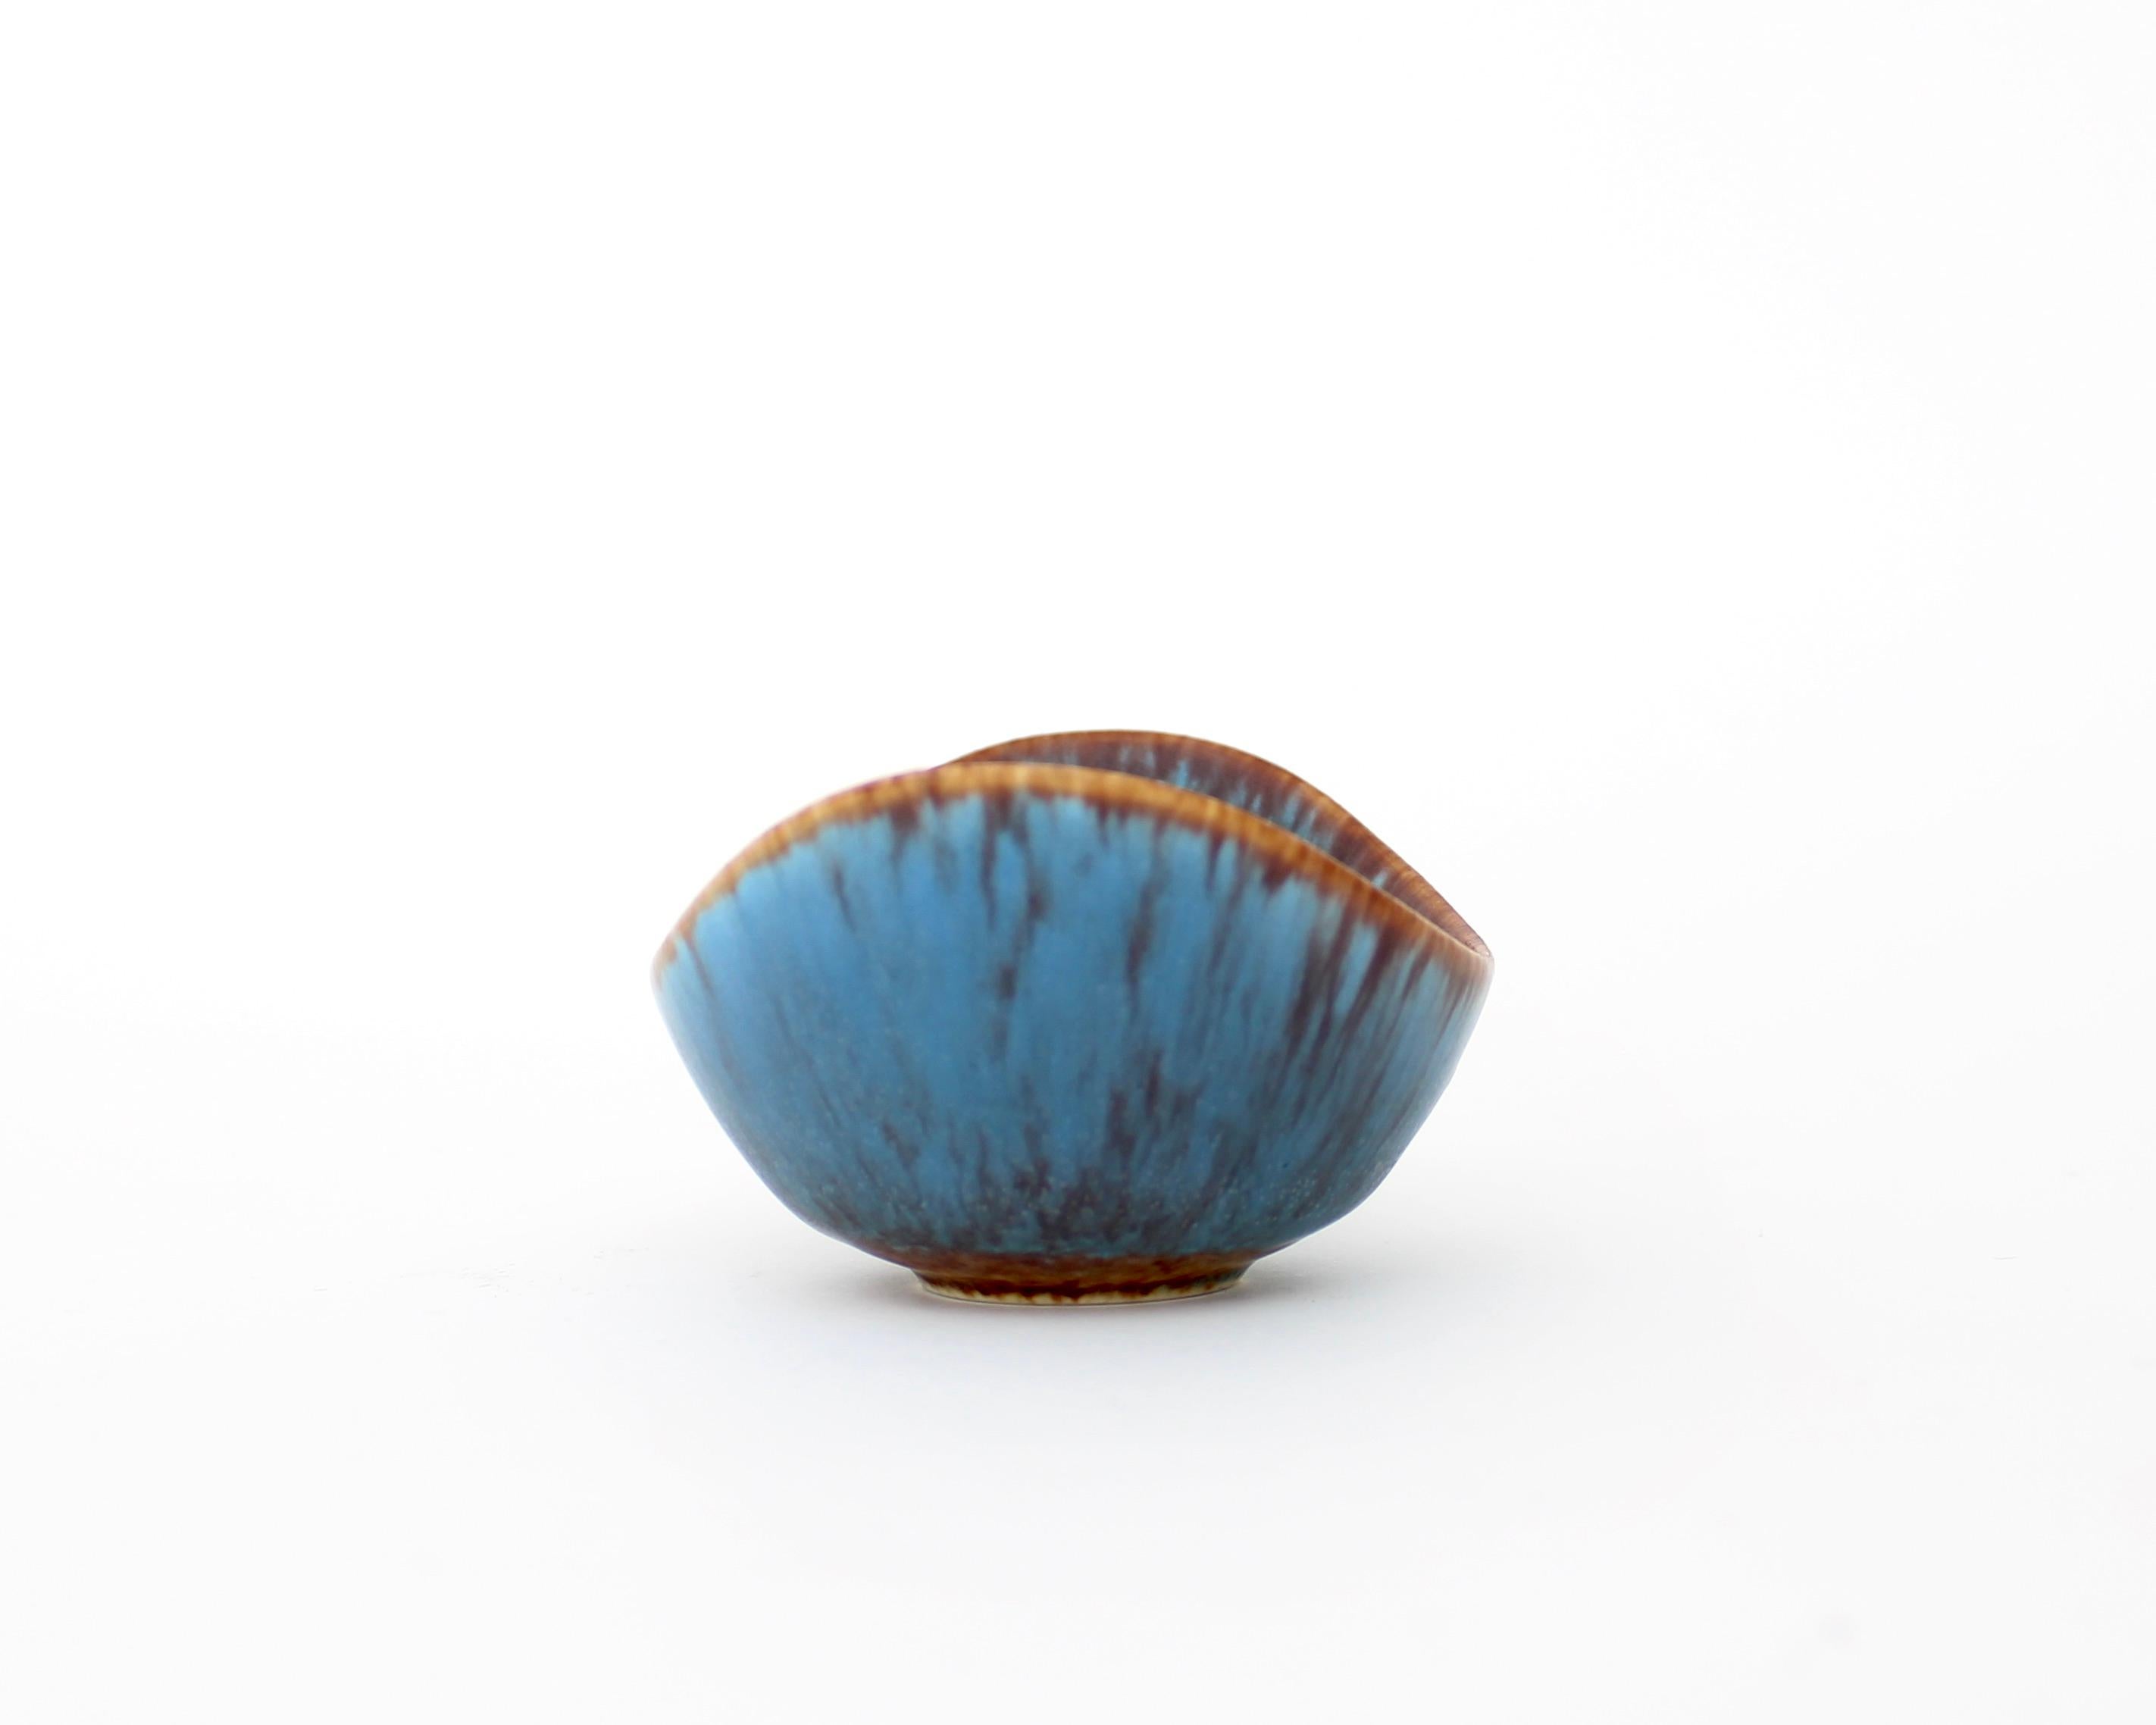 Small size ARO bowl created and designed by Gunnar Nylund at the Rörstrand Factory in the 1950s, Sweden.
Blue hares fur glaze breaking to browns along the lip edge. Excellent condition. No chips.